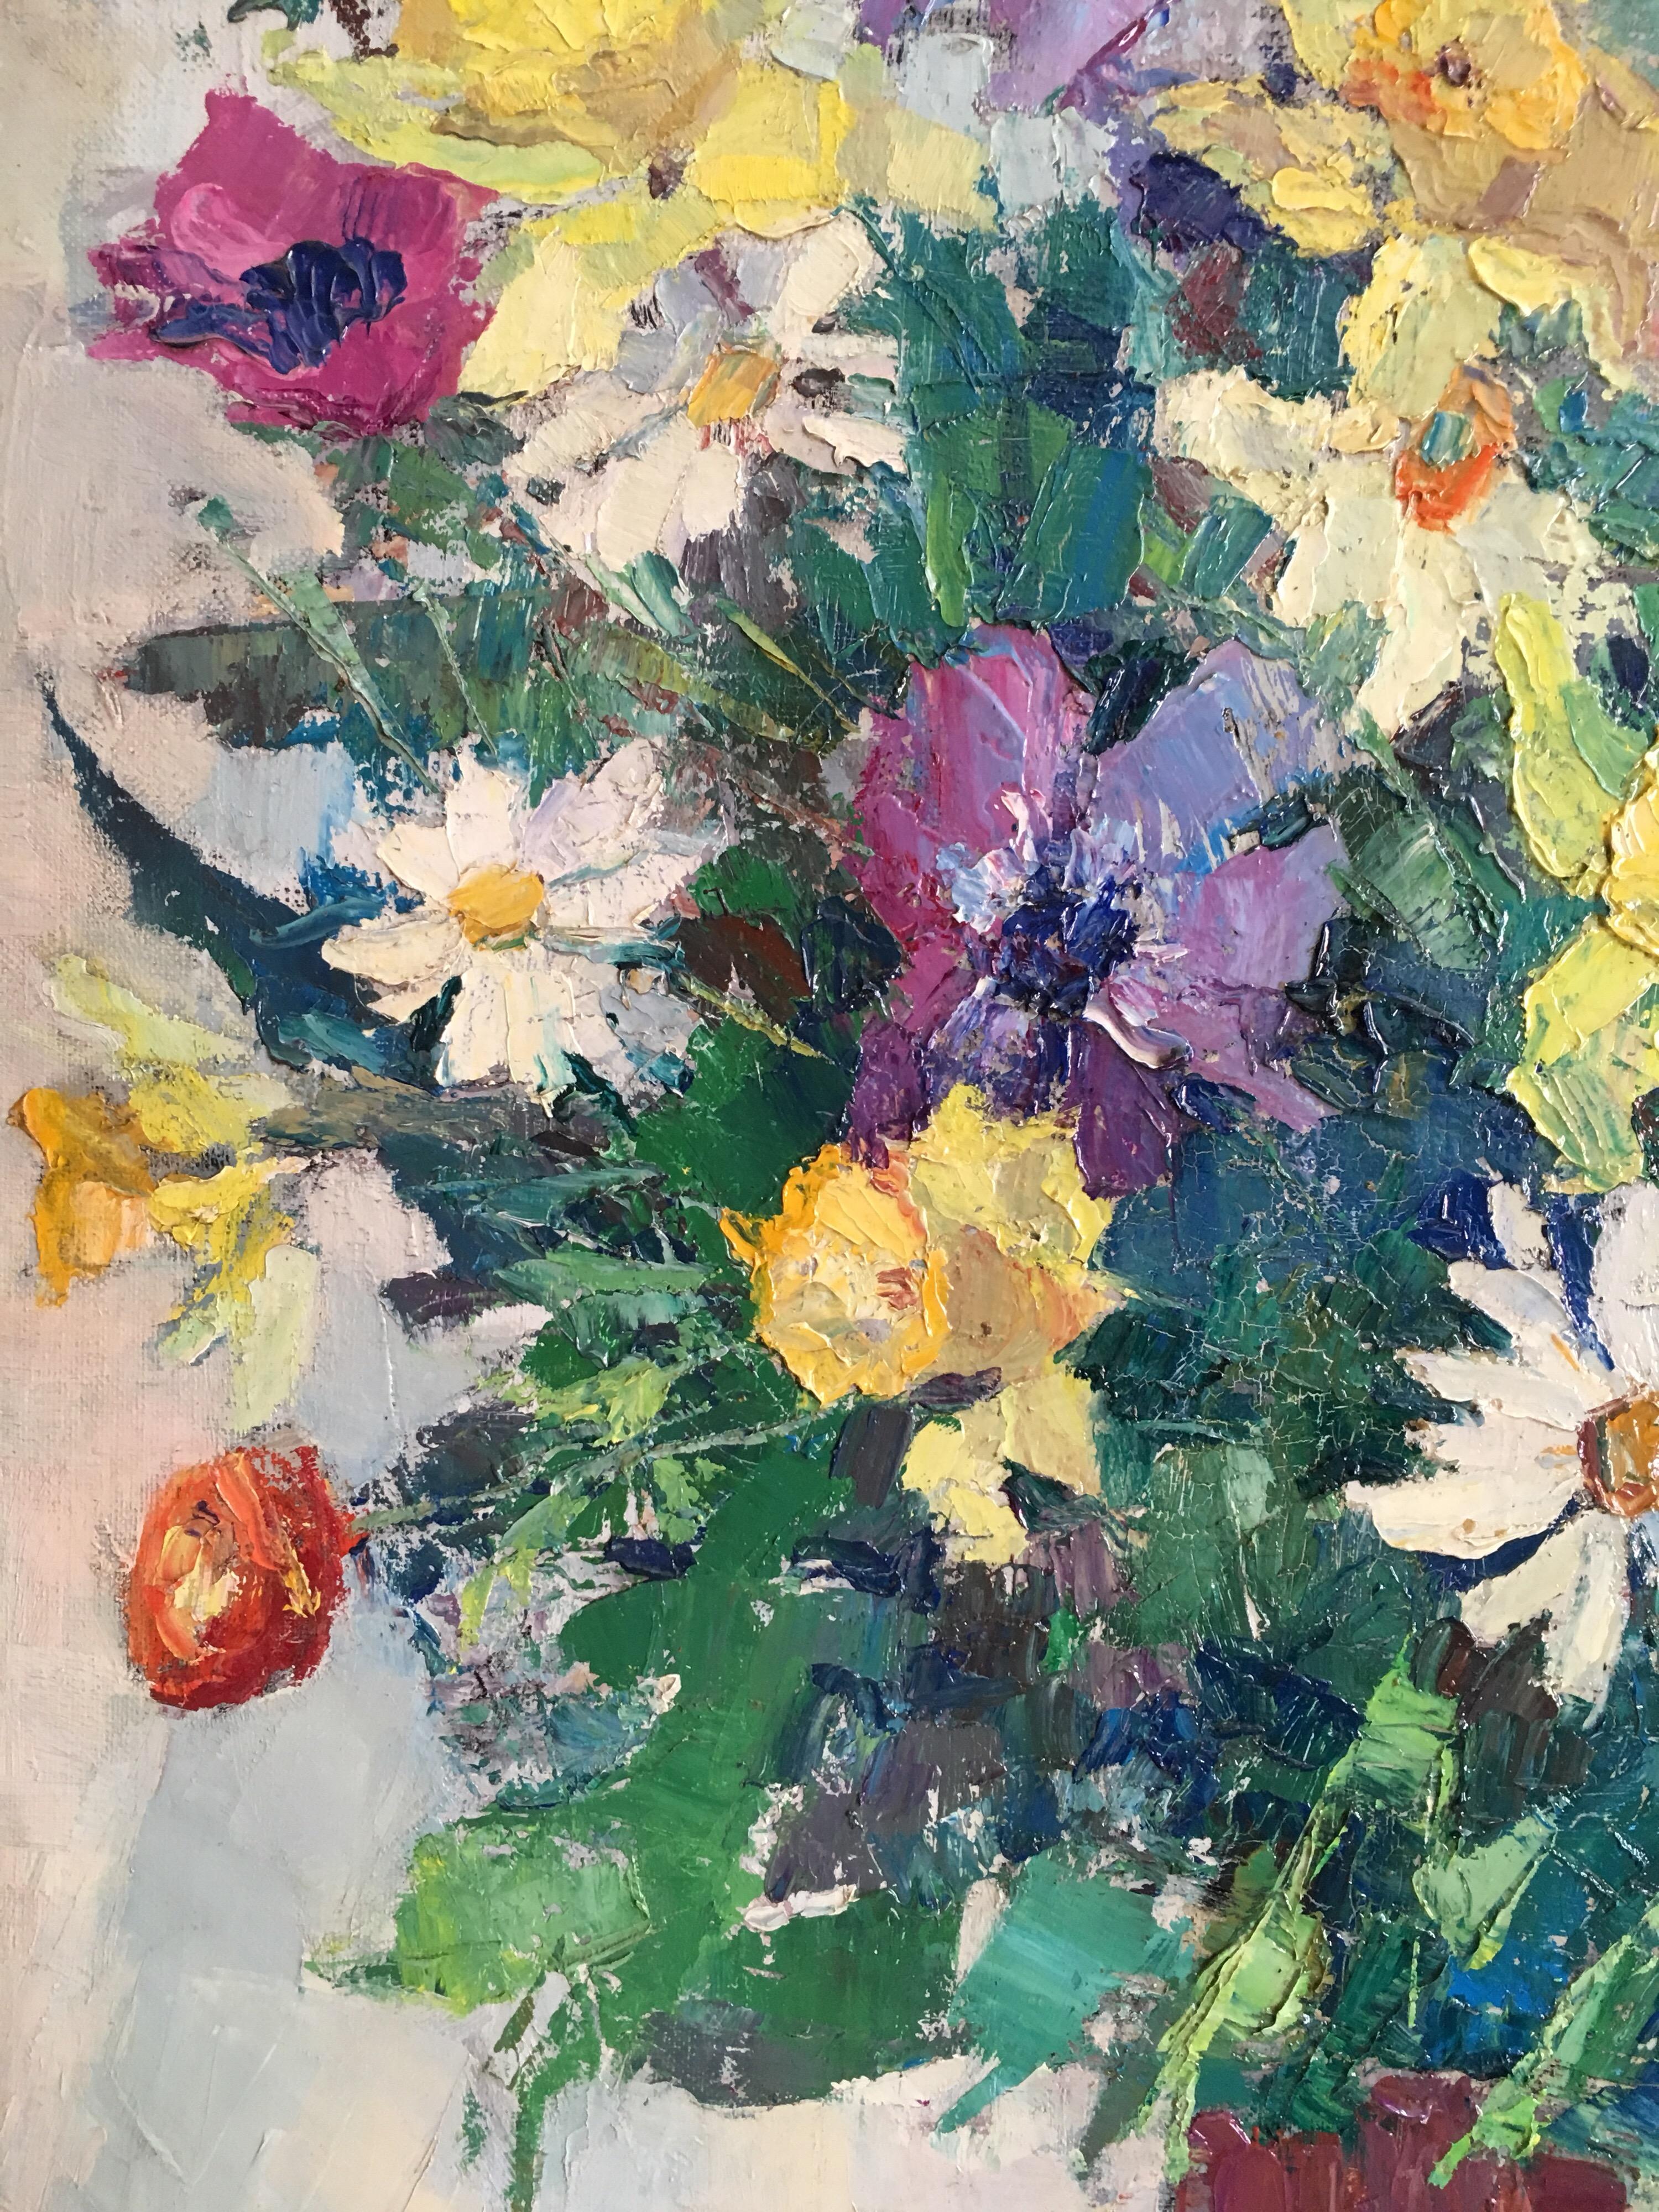 Colourful Floral Bouquet, French Artist, Signed
By French artist Suzette Mezie, Mid 20th Century
Signed by the artist on the lower right hand corner 
Oil painting on canvas, unframed
Canvas size: 32 x 23.5 inches

Wonderfully bright and vibrant